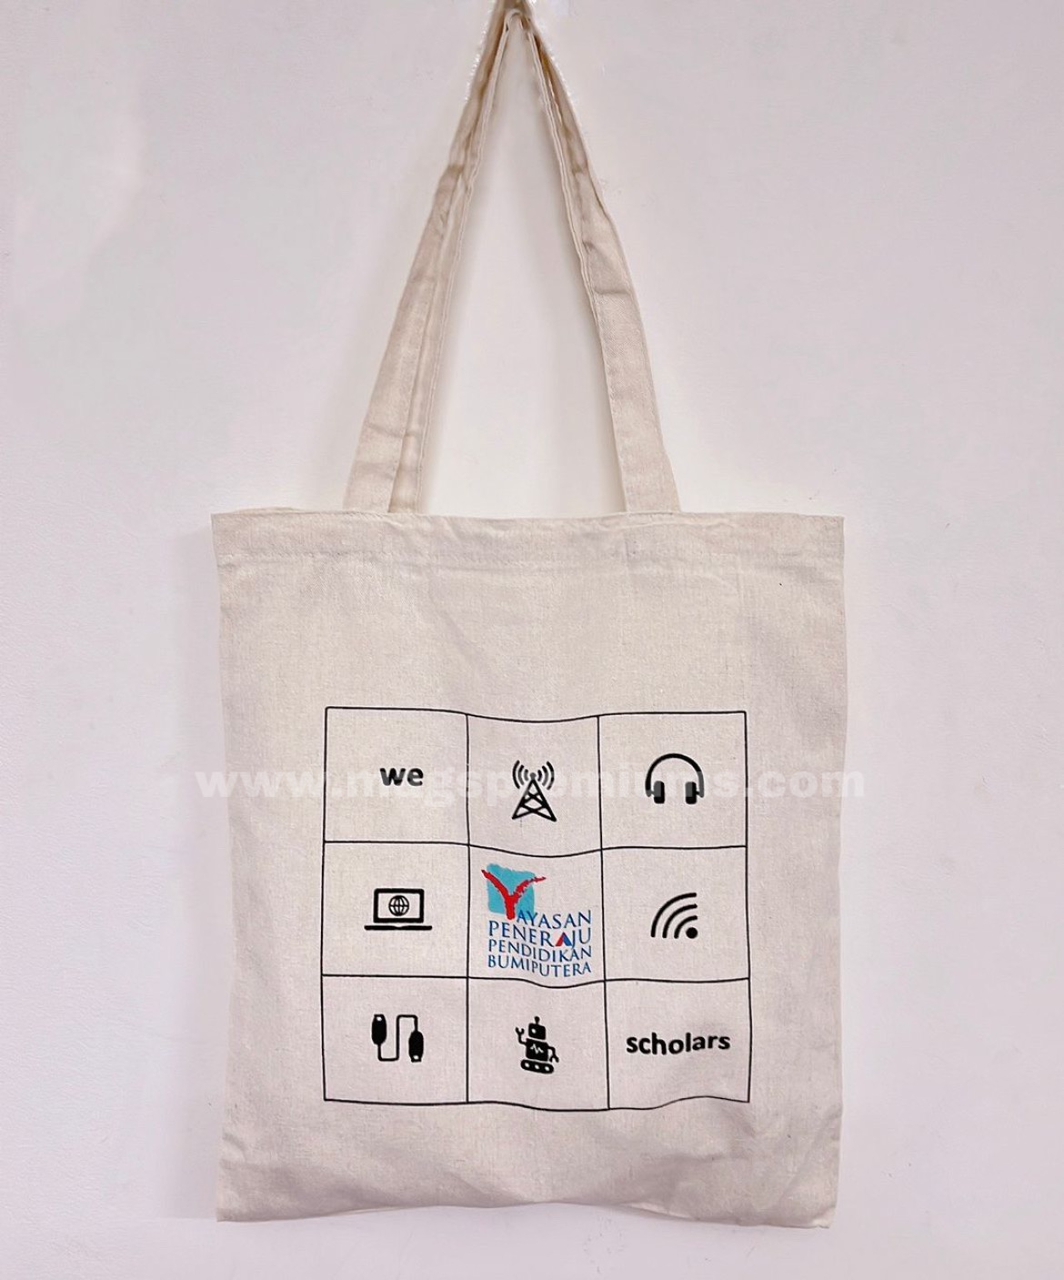 Cotton Canvas Tote Freetime Every Day Tote Bag